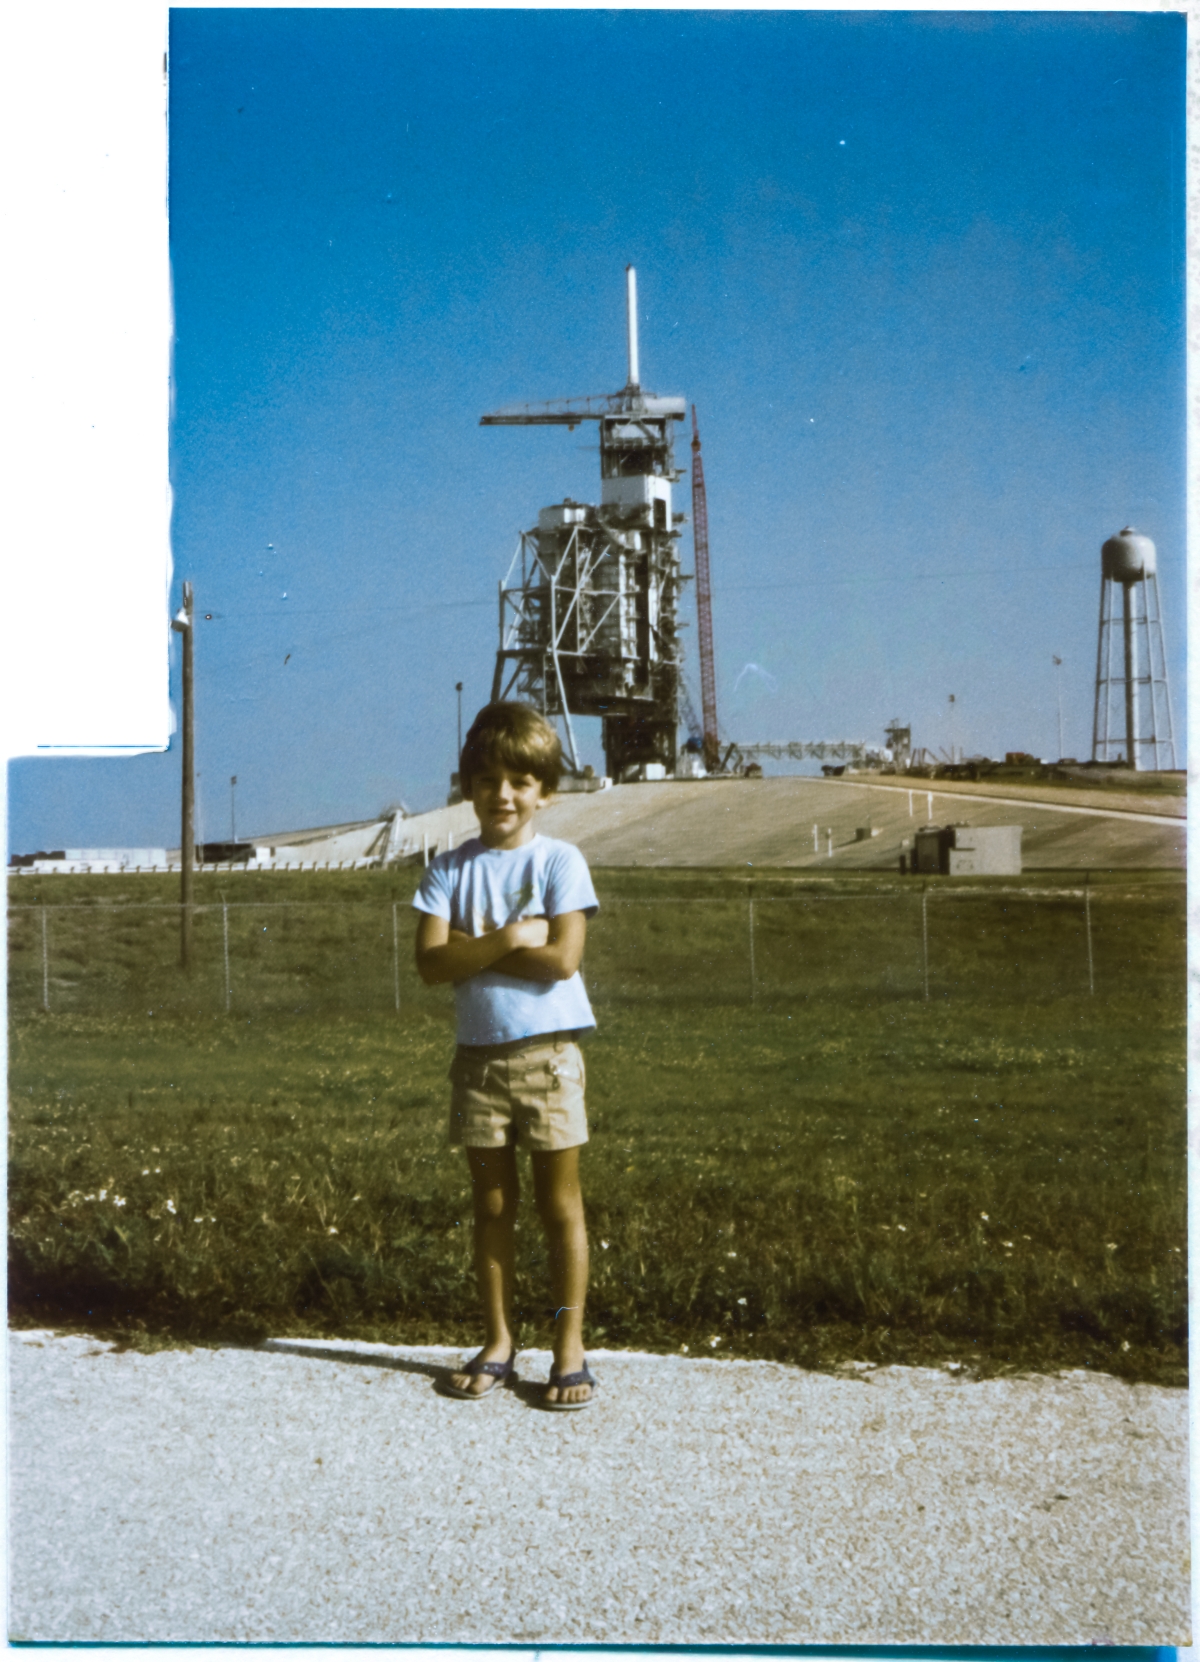 Image 073. At an age of 6 years old, an age that could not be more perfectly matched for the moment, Kai MacLaren stands on the Bypass Road just outside the Perimeter Fence of Space Shuttle Launch Complex 39-B, Kennedy Space Center, Florida. Behind him, to the northeast, the looming structures of the RSS and the FSS tower above the concrete body of the Pad, attended by large construction cranes. Kai is as much in his element as it is ever possible to be, and understands exactly how rare and sublime a moment this is, and will remember it for a lifetime. As will his father. Photo by James MacLaren.